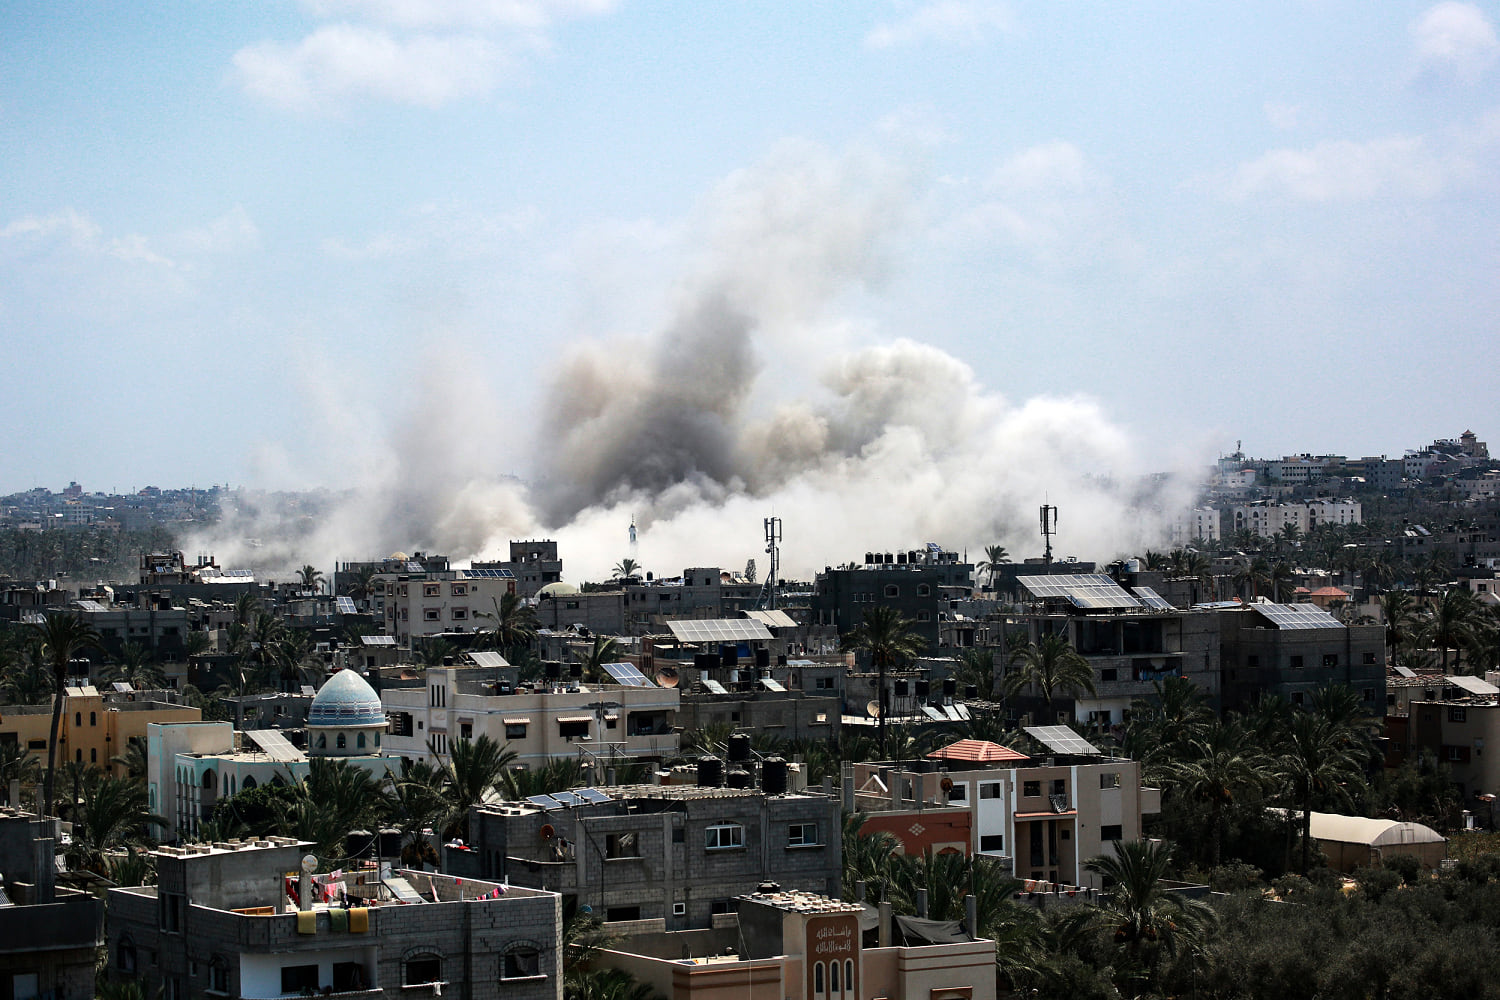 Israeli airstrike hits a school sheltering people in Gaza, killing at least 30 